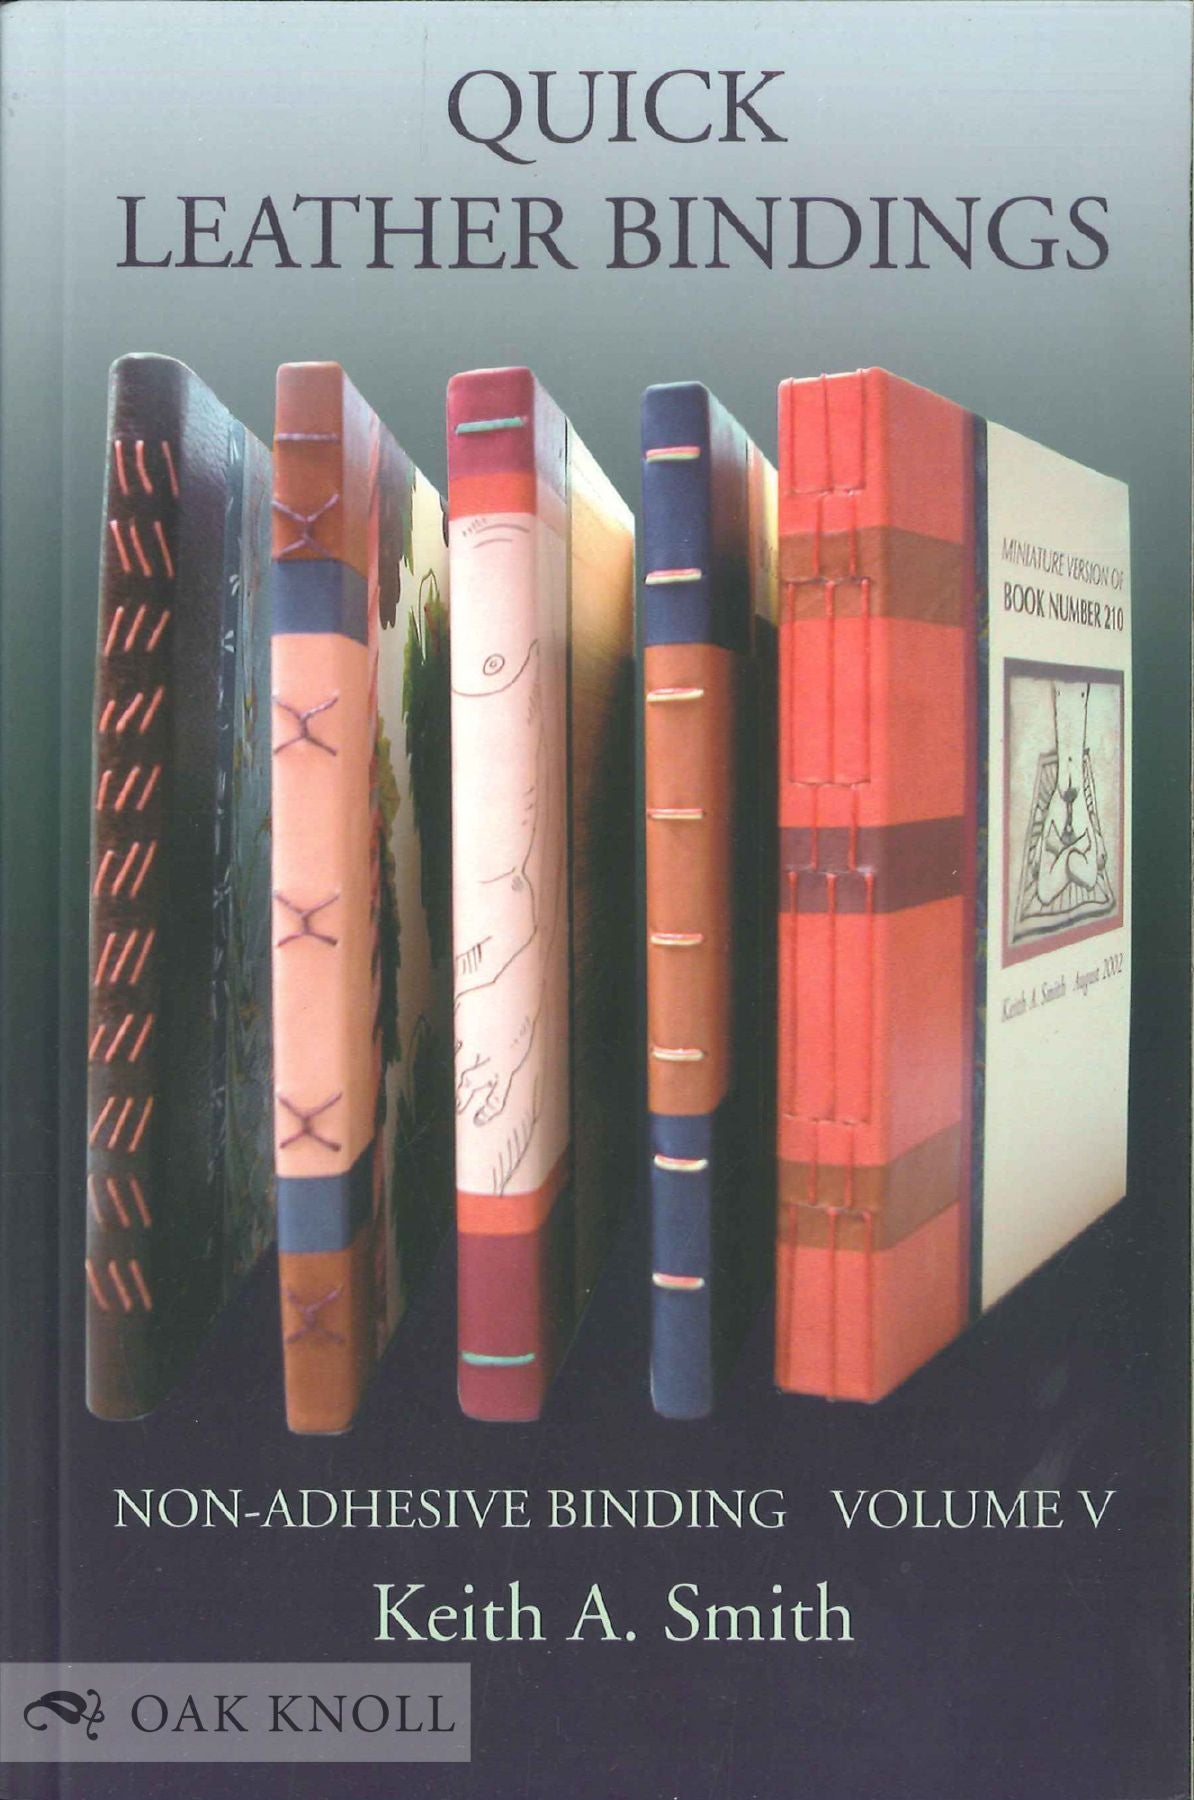 NON-ADHESIVE BINDING, BOOKS WITHOUT PASTE OR GLUE by Keith A. Smith on Oak  Knoll